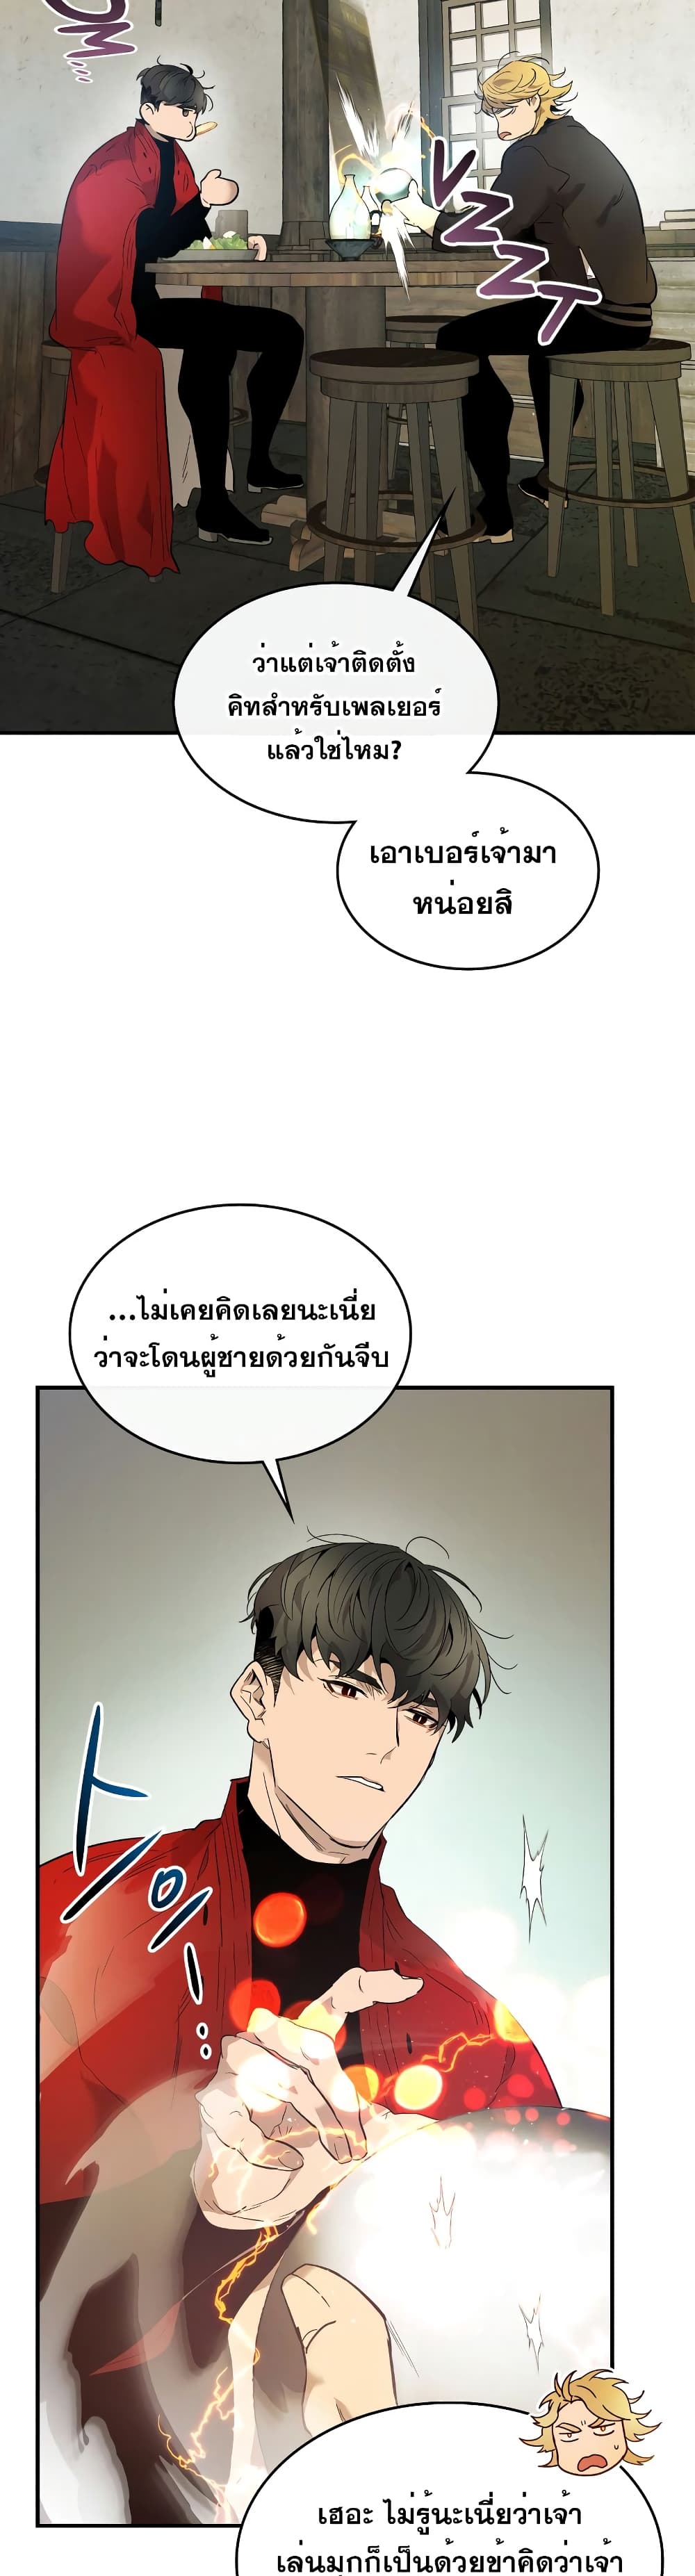 Leveling With The Gods 24 แปลไทย